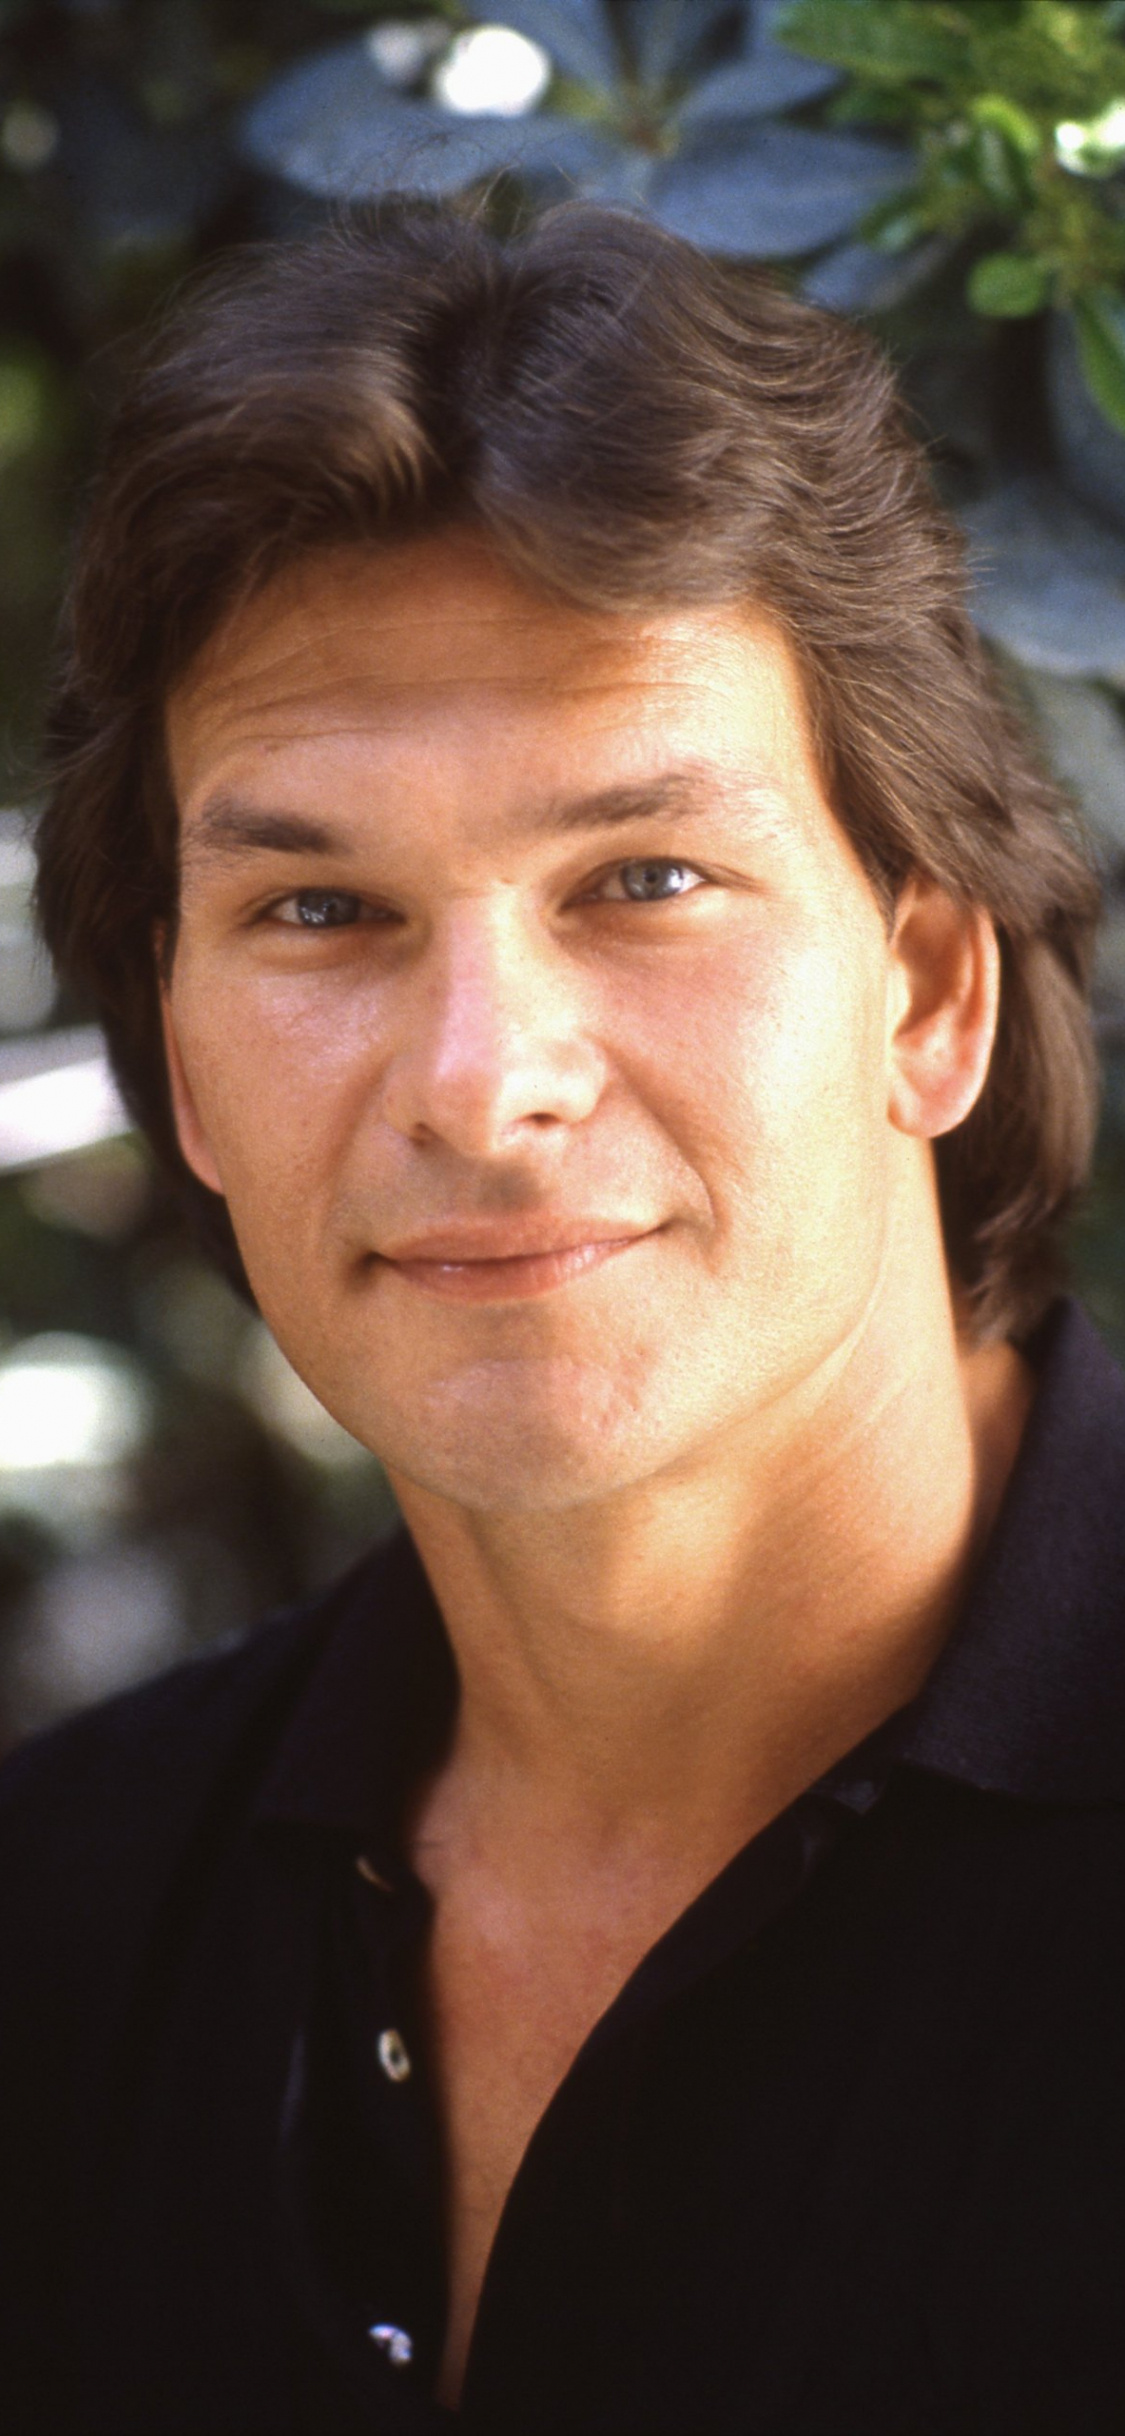 Patrick Swayze, Movie star, High quality wallpapers, Desktop and mobile, 1130x2440 HD Handy